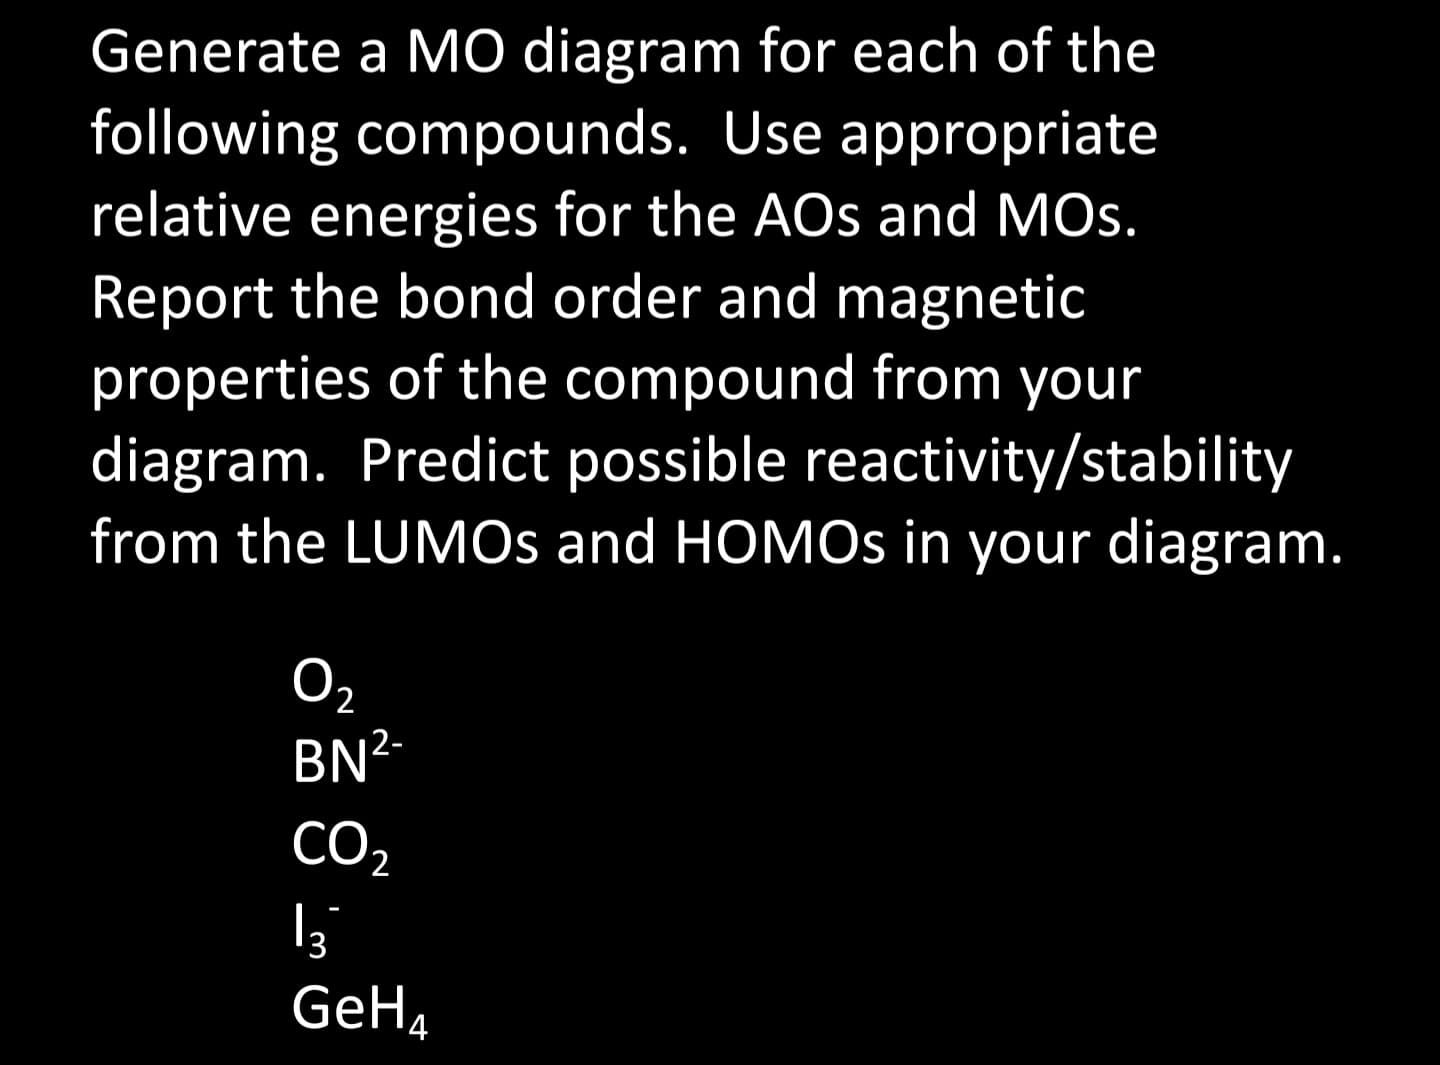 Generate a MO diagram for each of the
following compounds. Use appropriate
relative energies for the AOs and MOS.
Report the bond order and magnetic
properties of the compound from your
diagram. Predict possible reactivity/stability
from the LUMOS and HOMOs in your diagram.
0₂
BN²-
CO₂
13
GeH